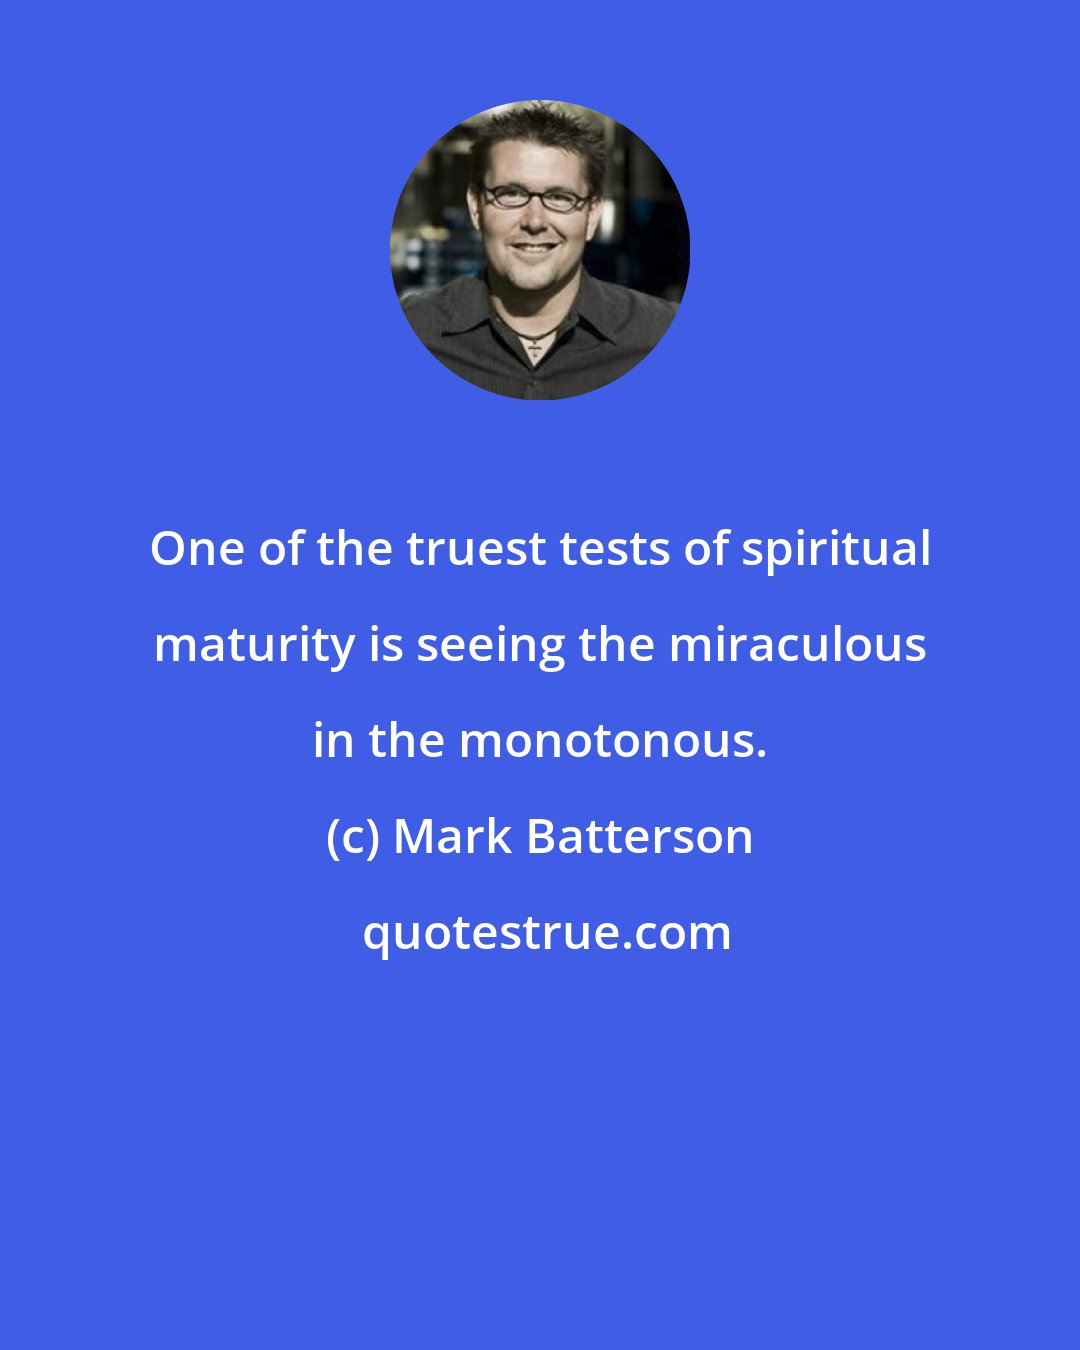 Mark Batterson: One of the truest tests of spiritual maturity is seeing the miraculous in the monotonous.